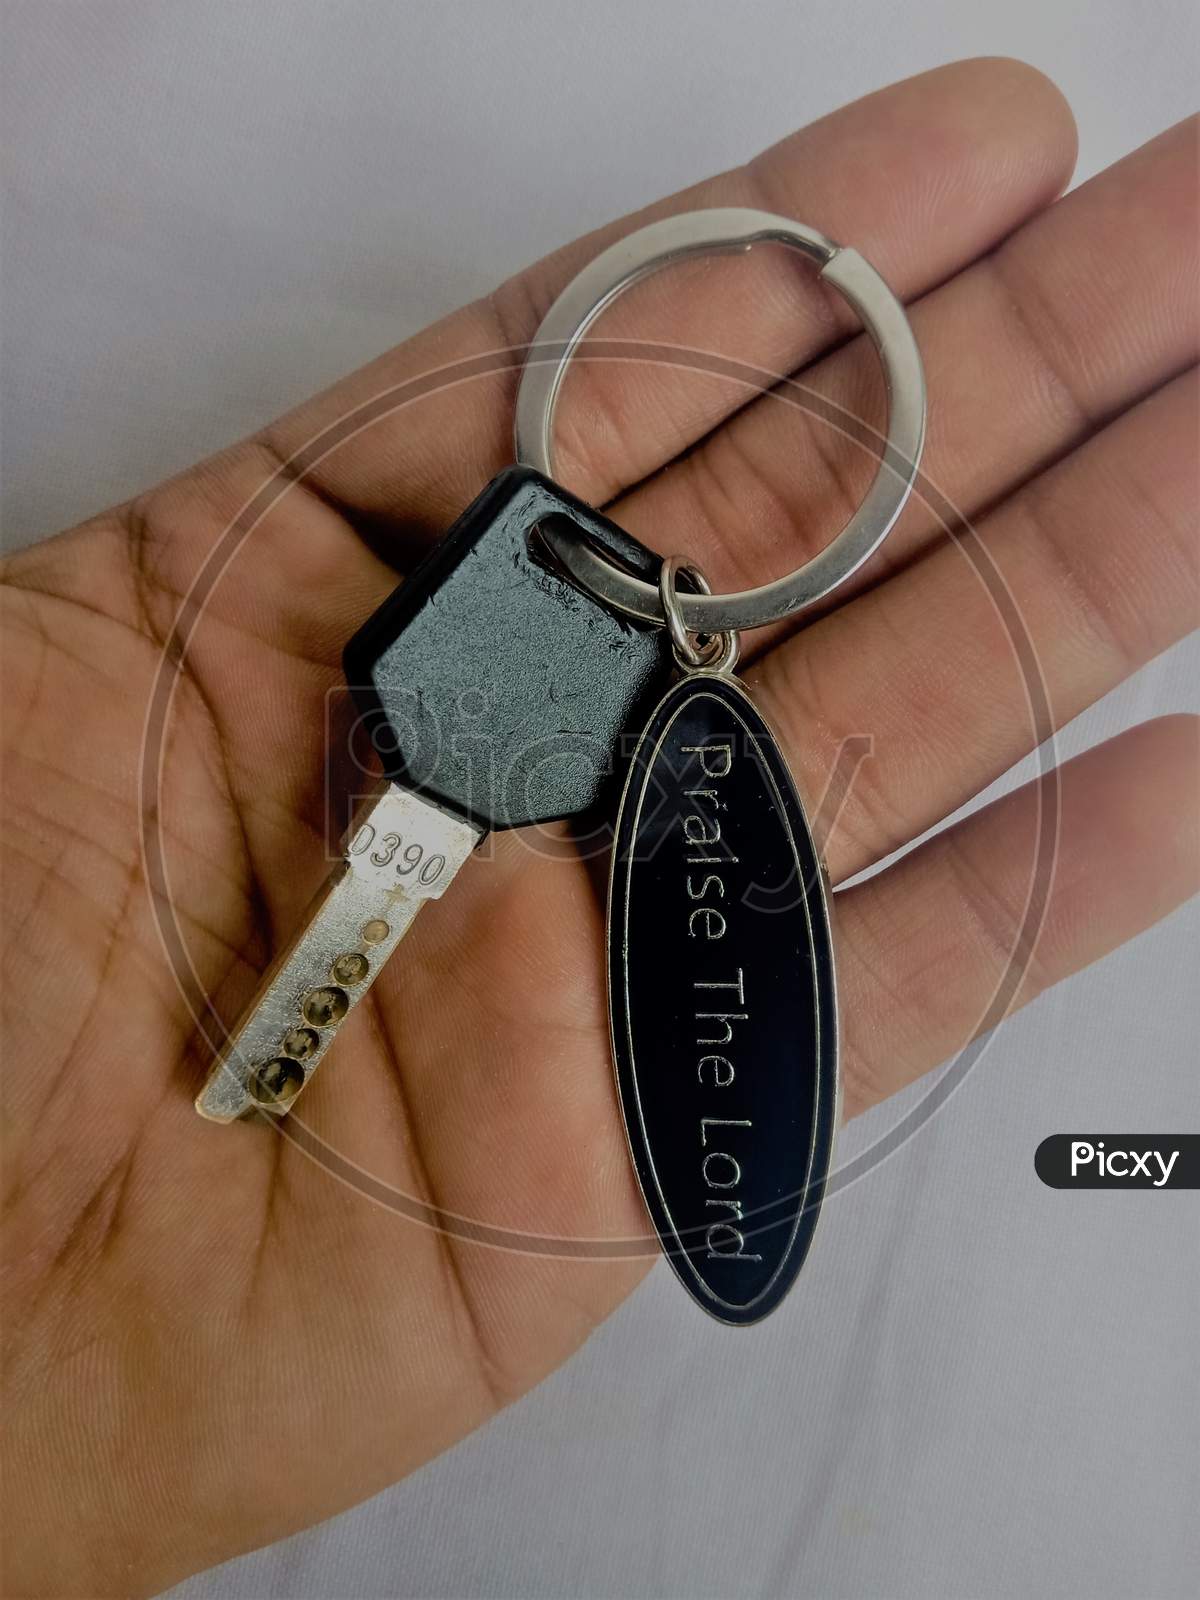 A key with a key chain isolated.